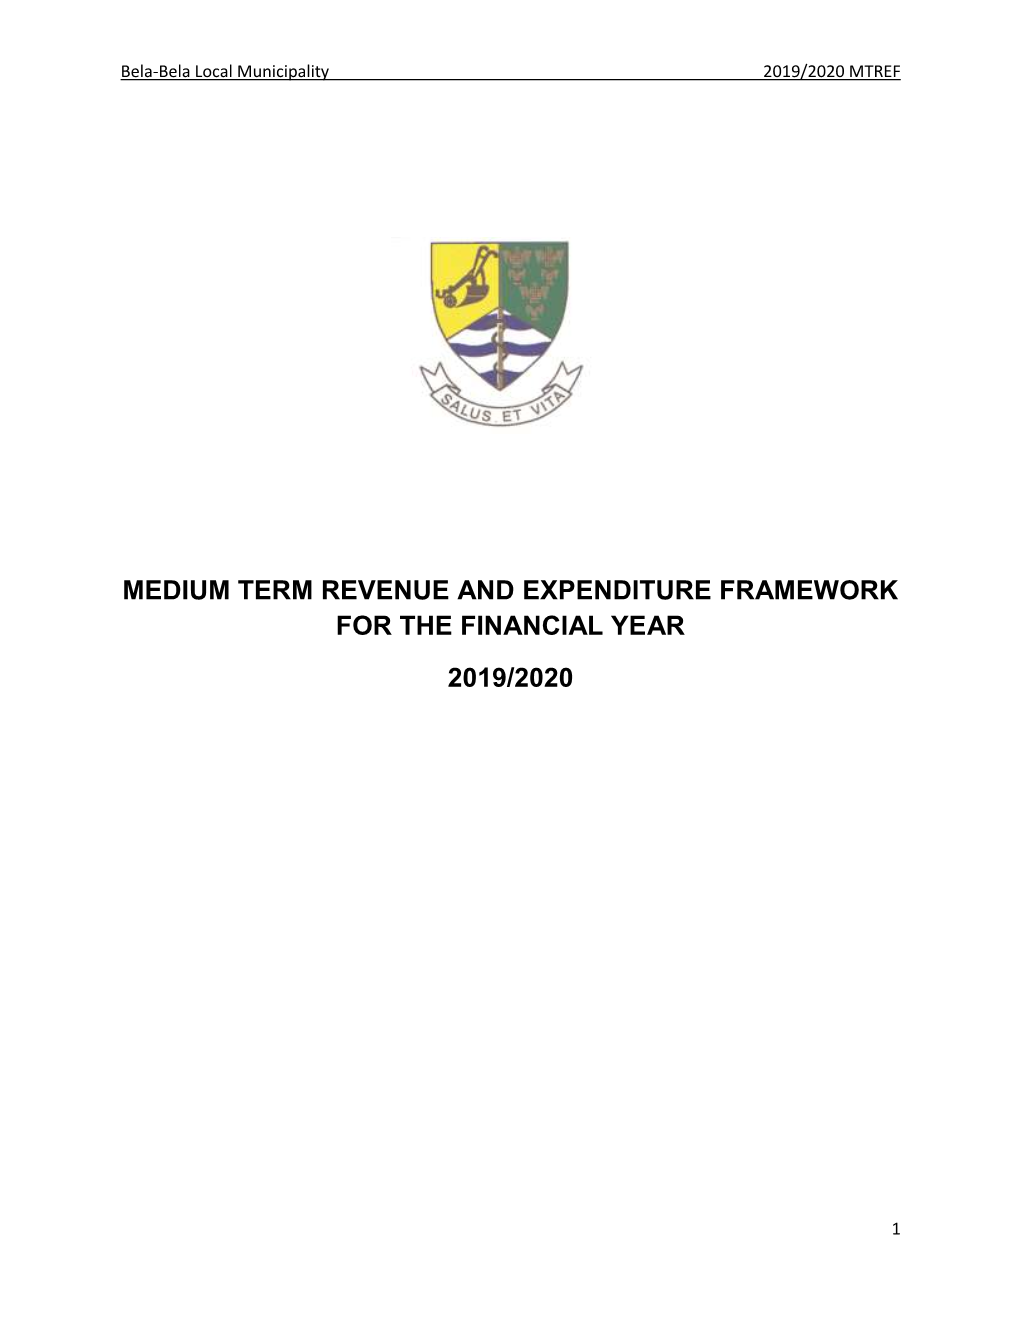 Medium Term Revenue and Expenditure Framework for the Financial Year 2019/2020